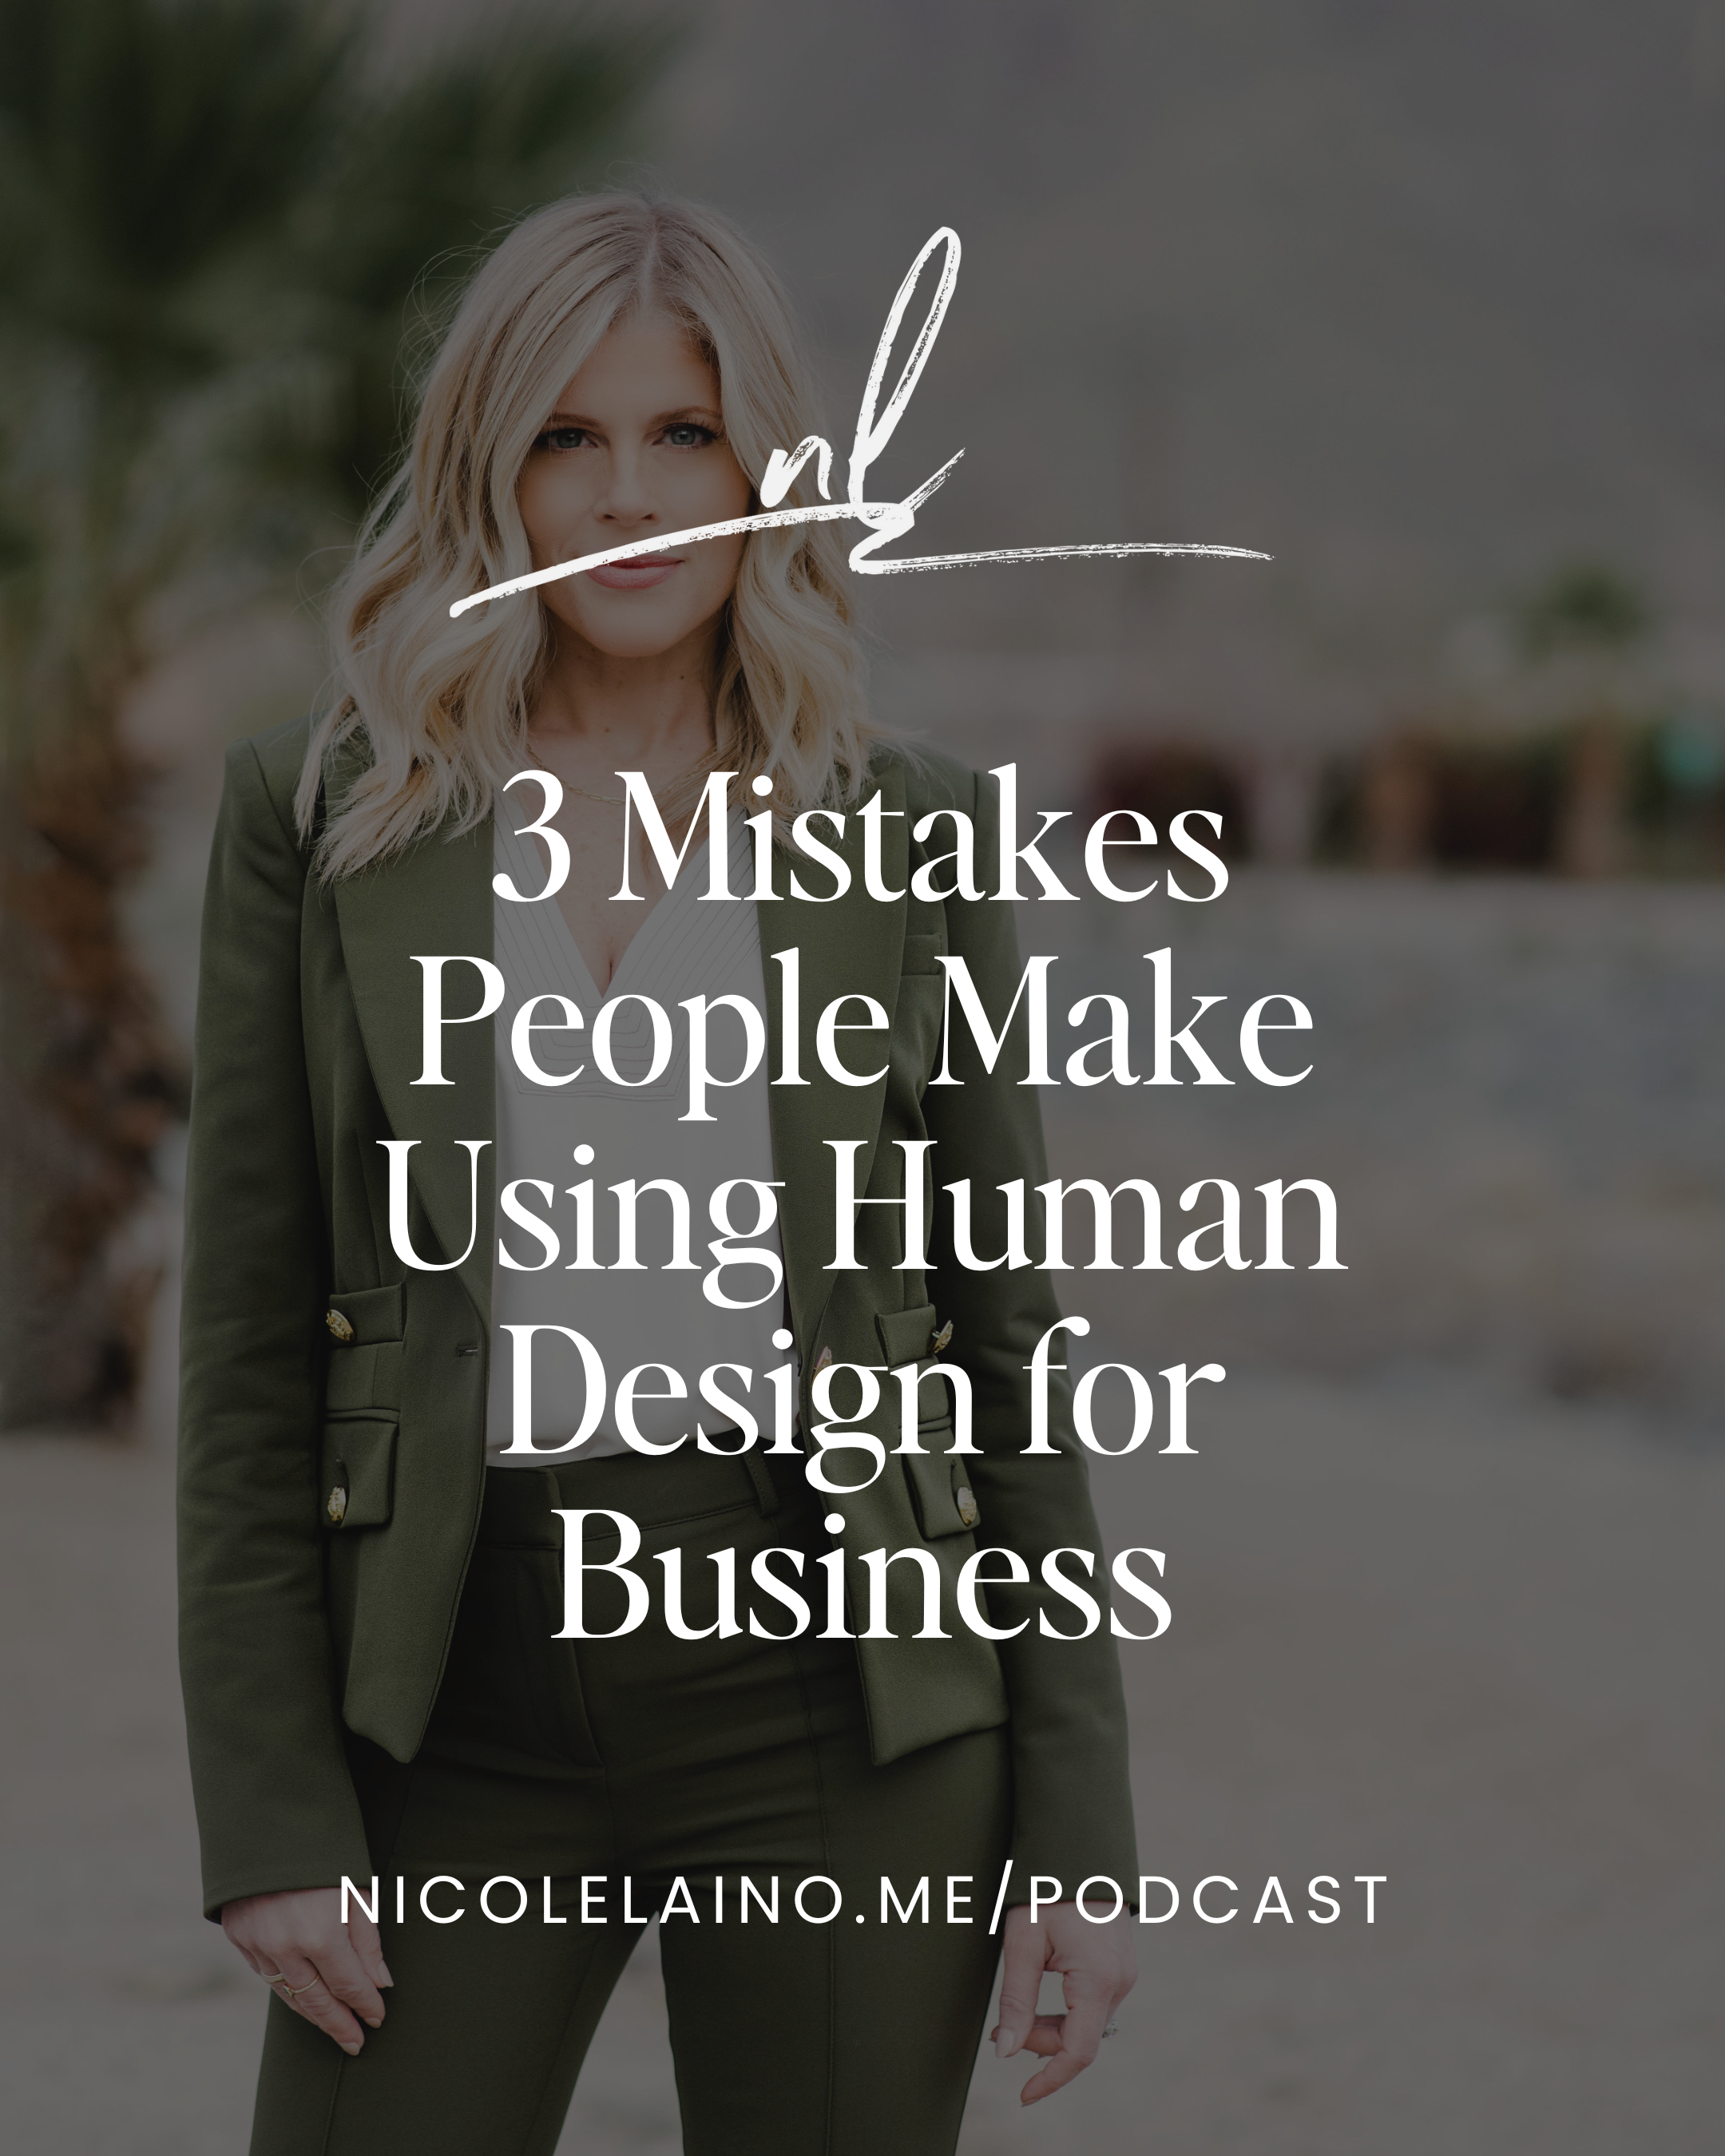 3 Mistakes People Make Using Human Design for Business